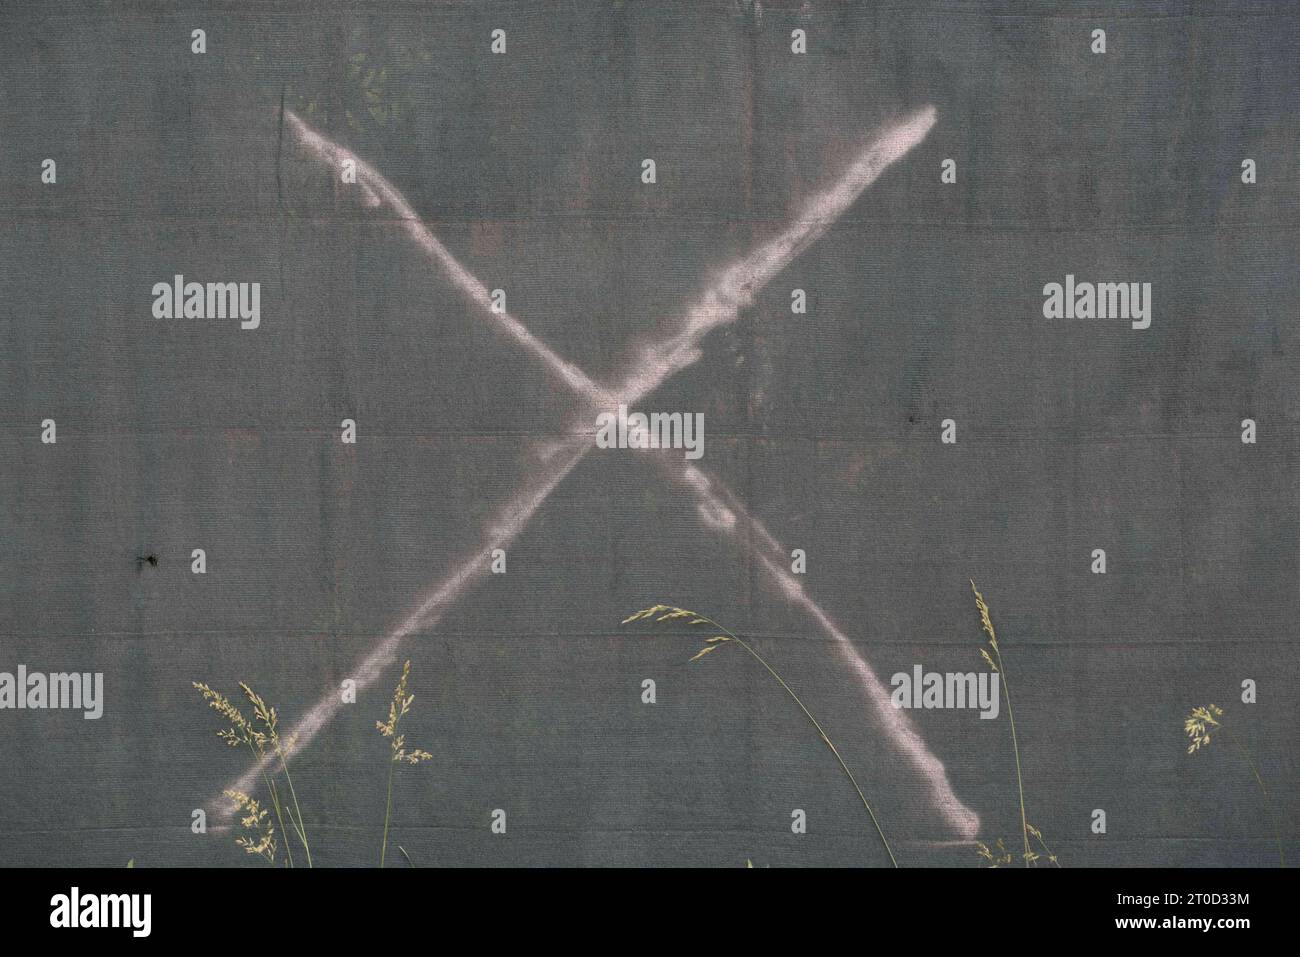 Object In Straight Line Shape Or Form, Pattern And Texture On A Surface Object In Straight Line Shape Or Form Credit: Imago/Alamy Live News Stock Photo